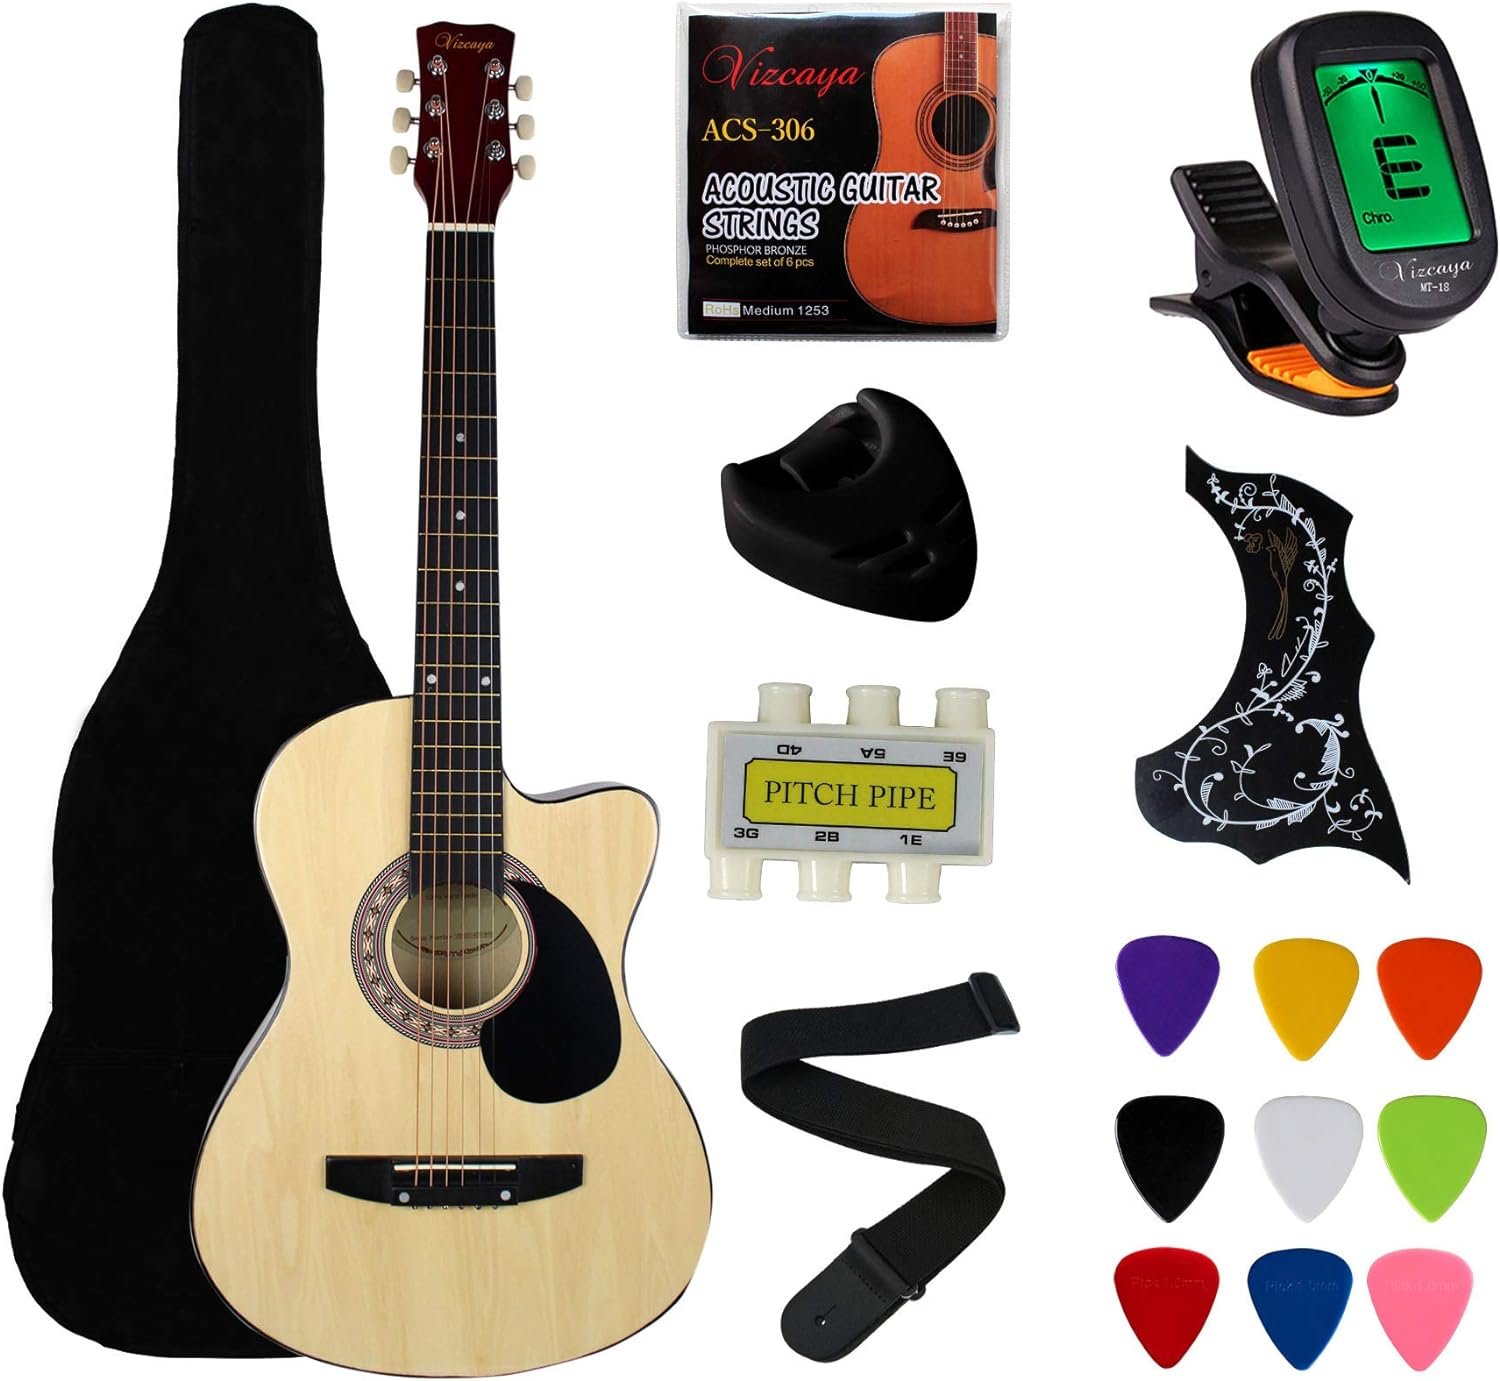 YMC 38 Cutaway Natural Beginner Acoustic Guitar Starter Package Student Guitar with Gig Bag,Strap, 3 thickness 9 picks,2 Pickguards,Pick Holder, Extra Strings, Electronic Tuner -Natural Cutaway